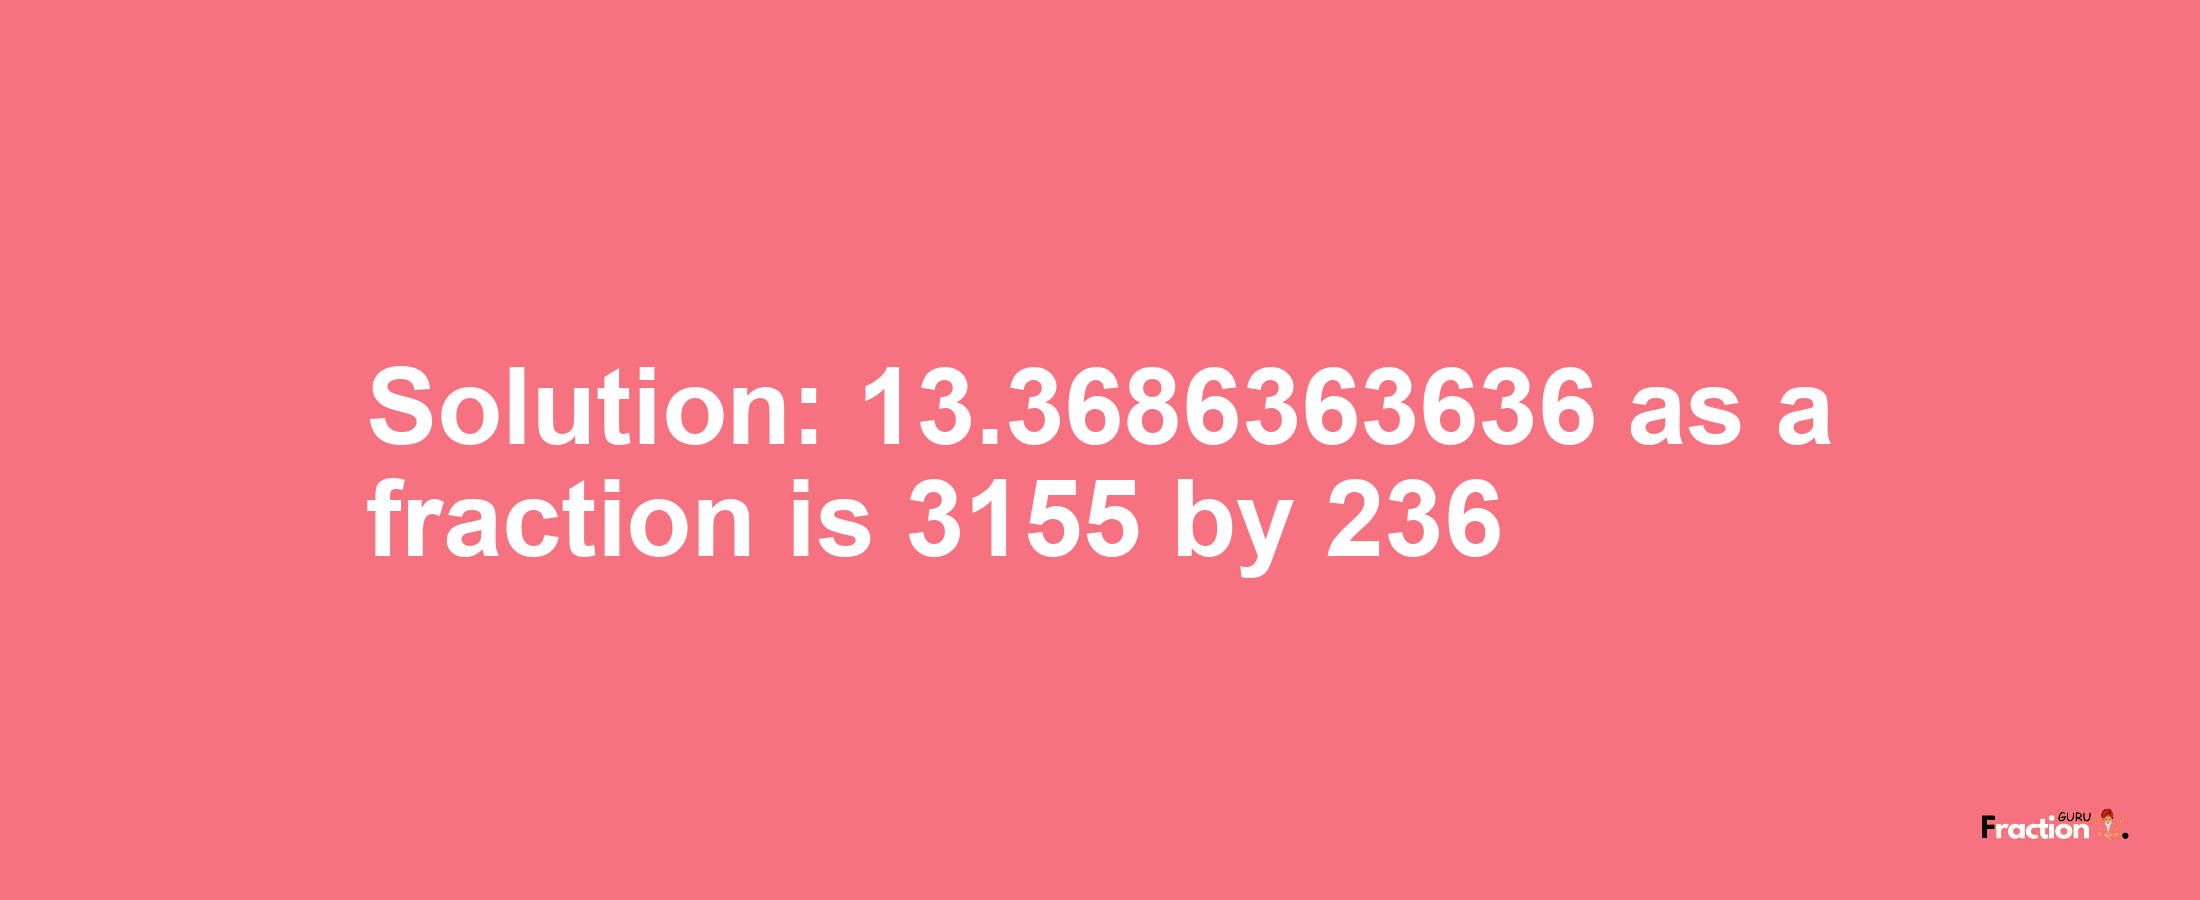 Solution:13.3686363636 as a fraction is 3155/236